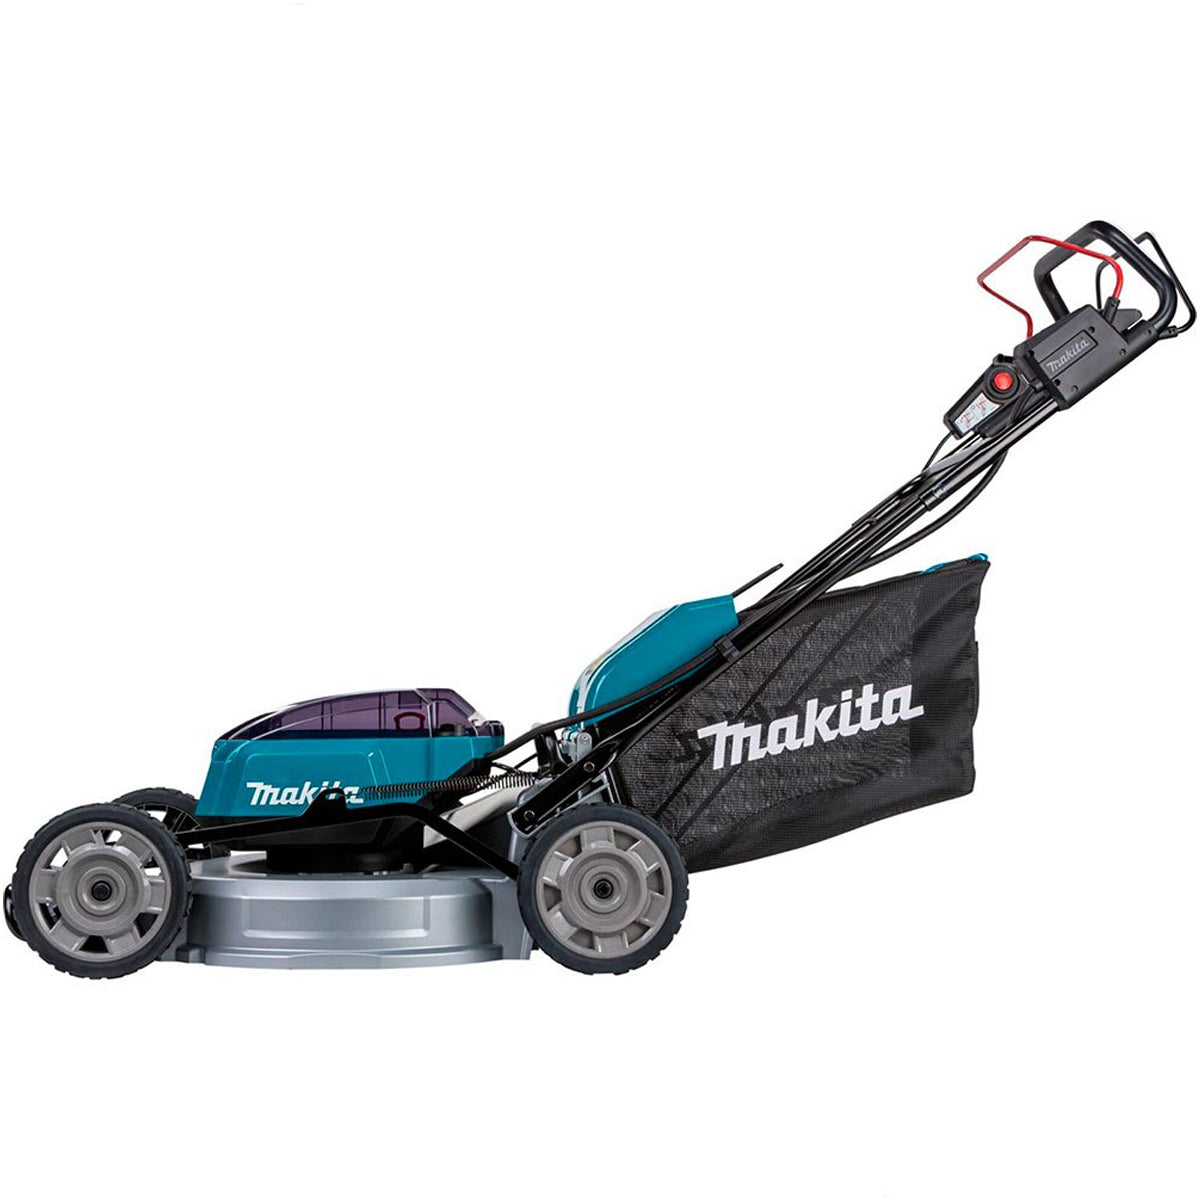 Makita DLM533PT4 36V LXT Brushless 530mm Lawn Mower With 4 x 5.0Ah Batteries & Twin Port Charger